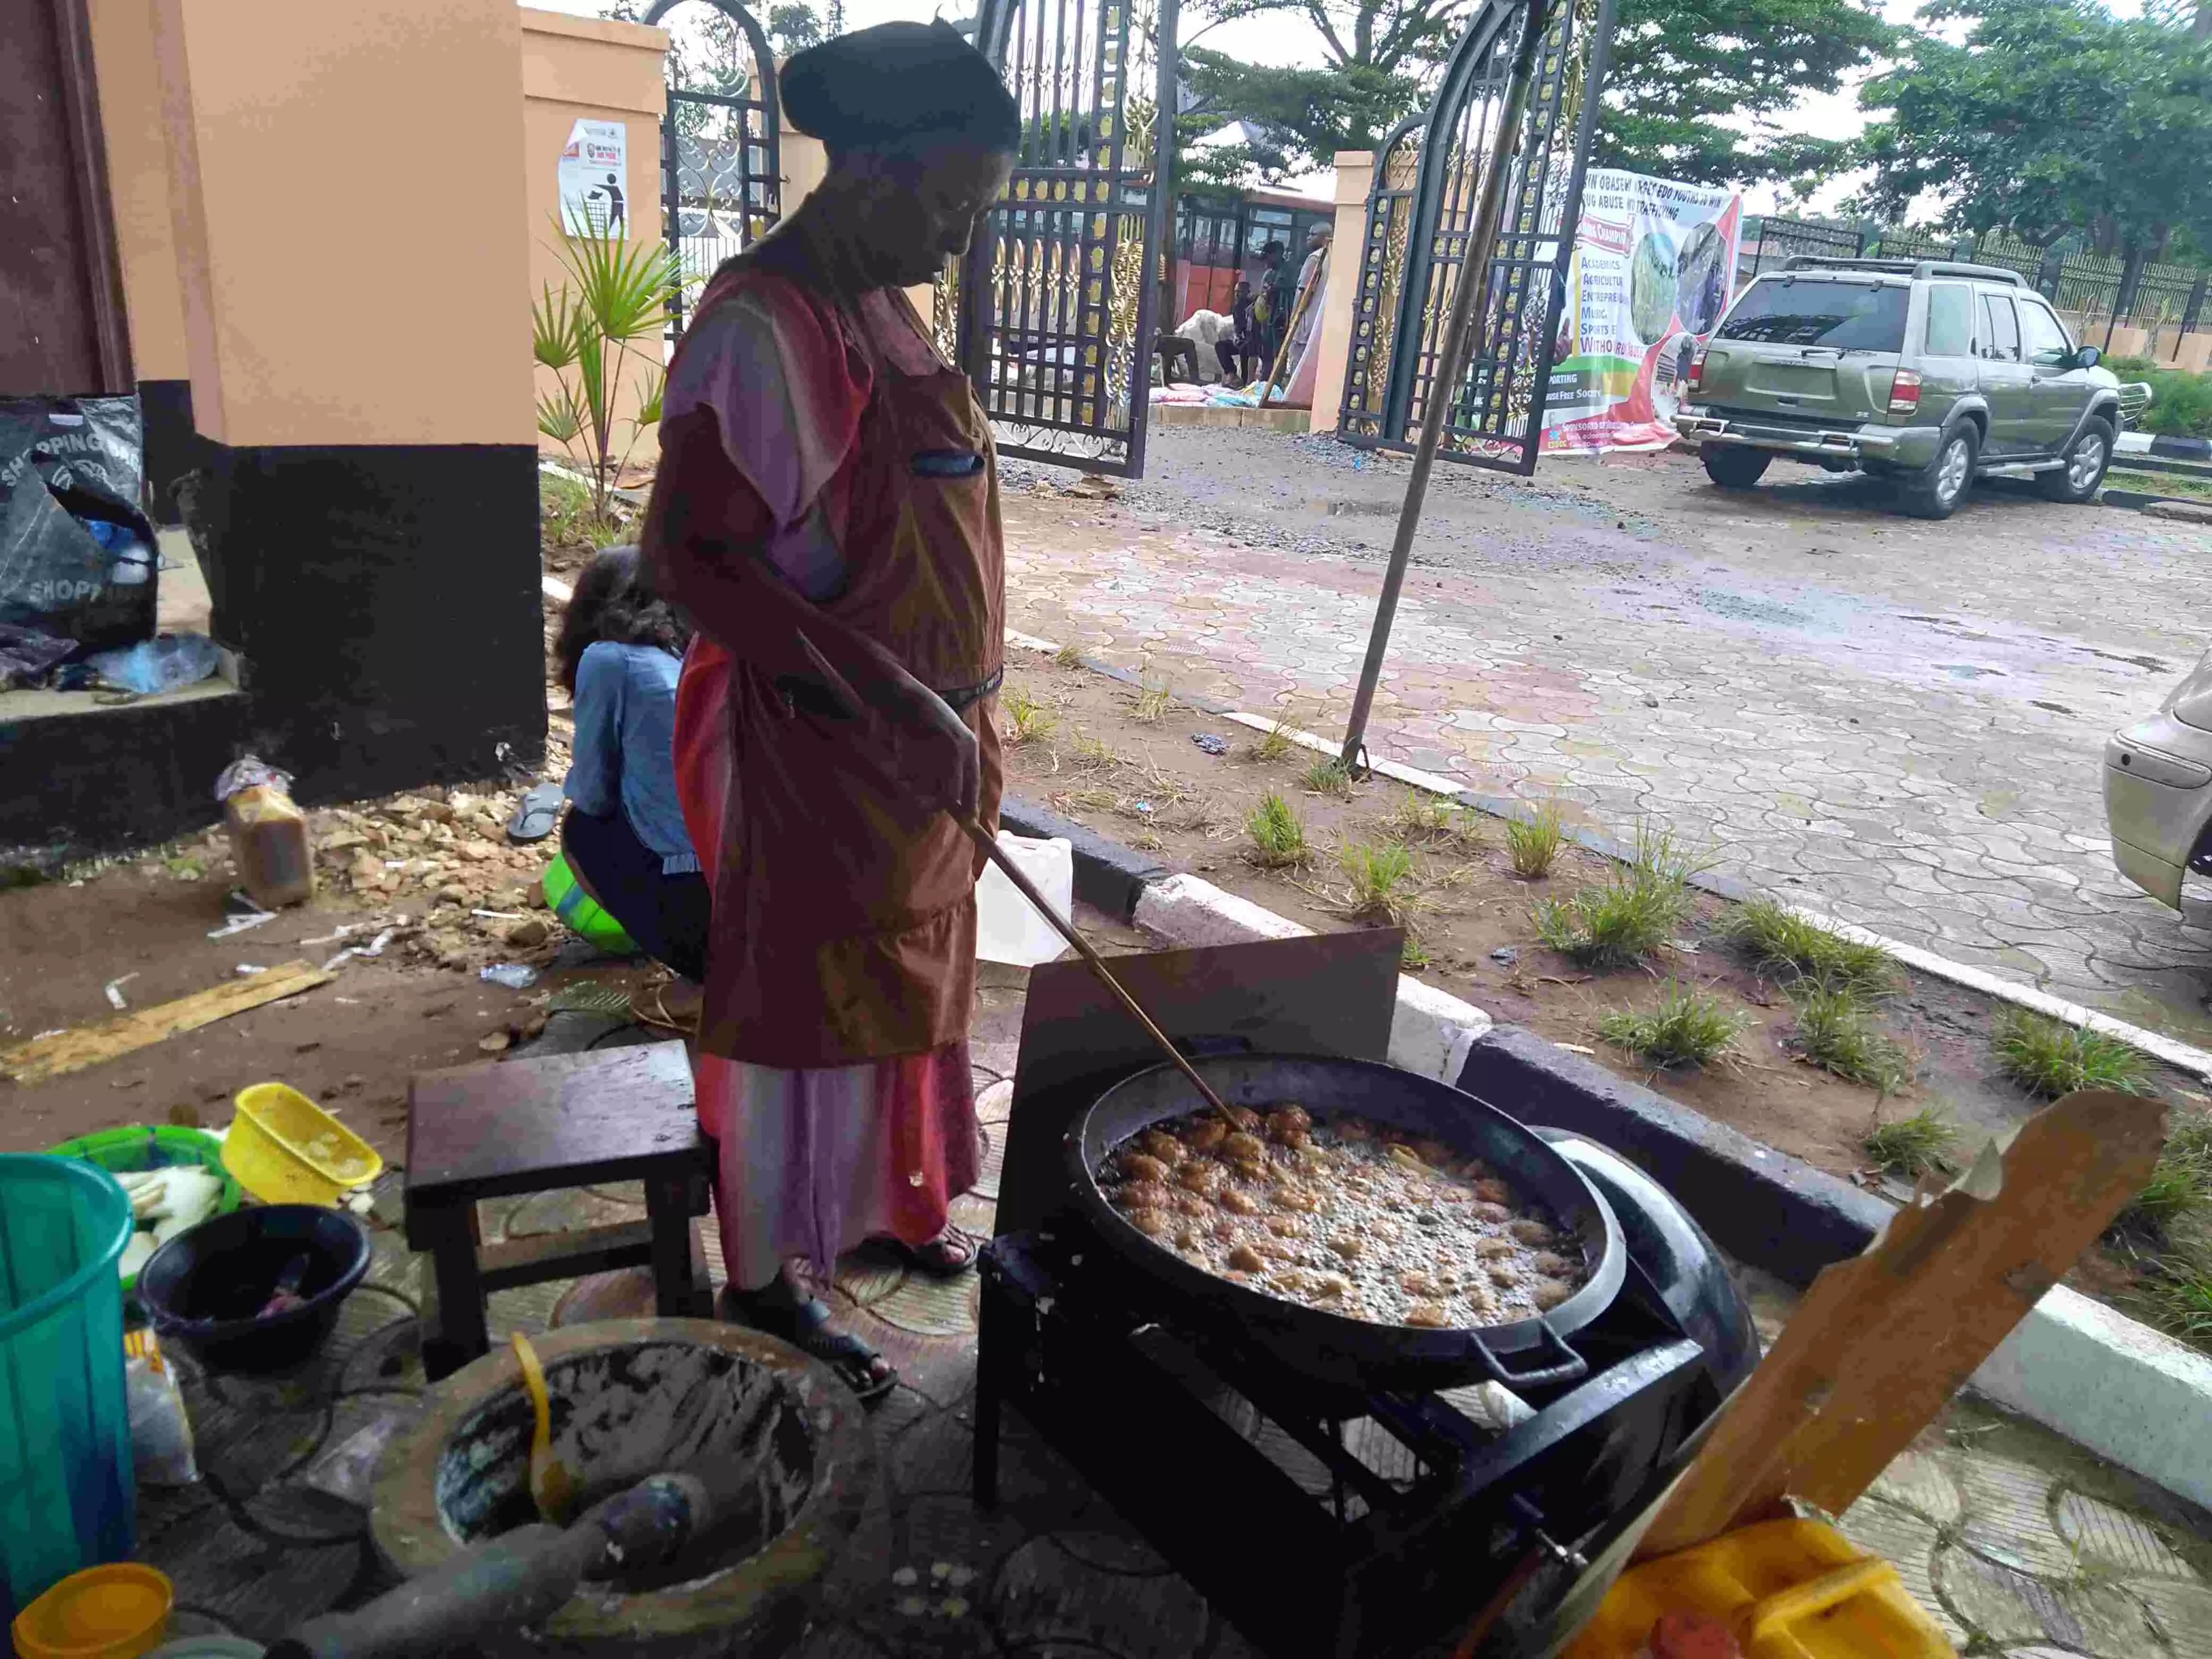 Beans ball fryer turns celebrity at NAFEST – hopes for a better future